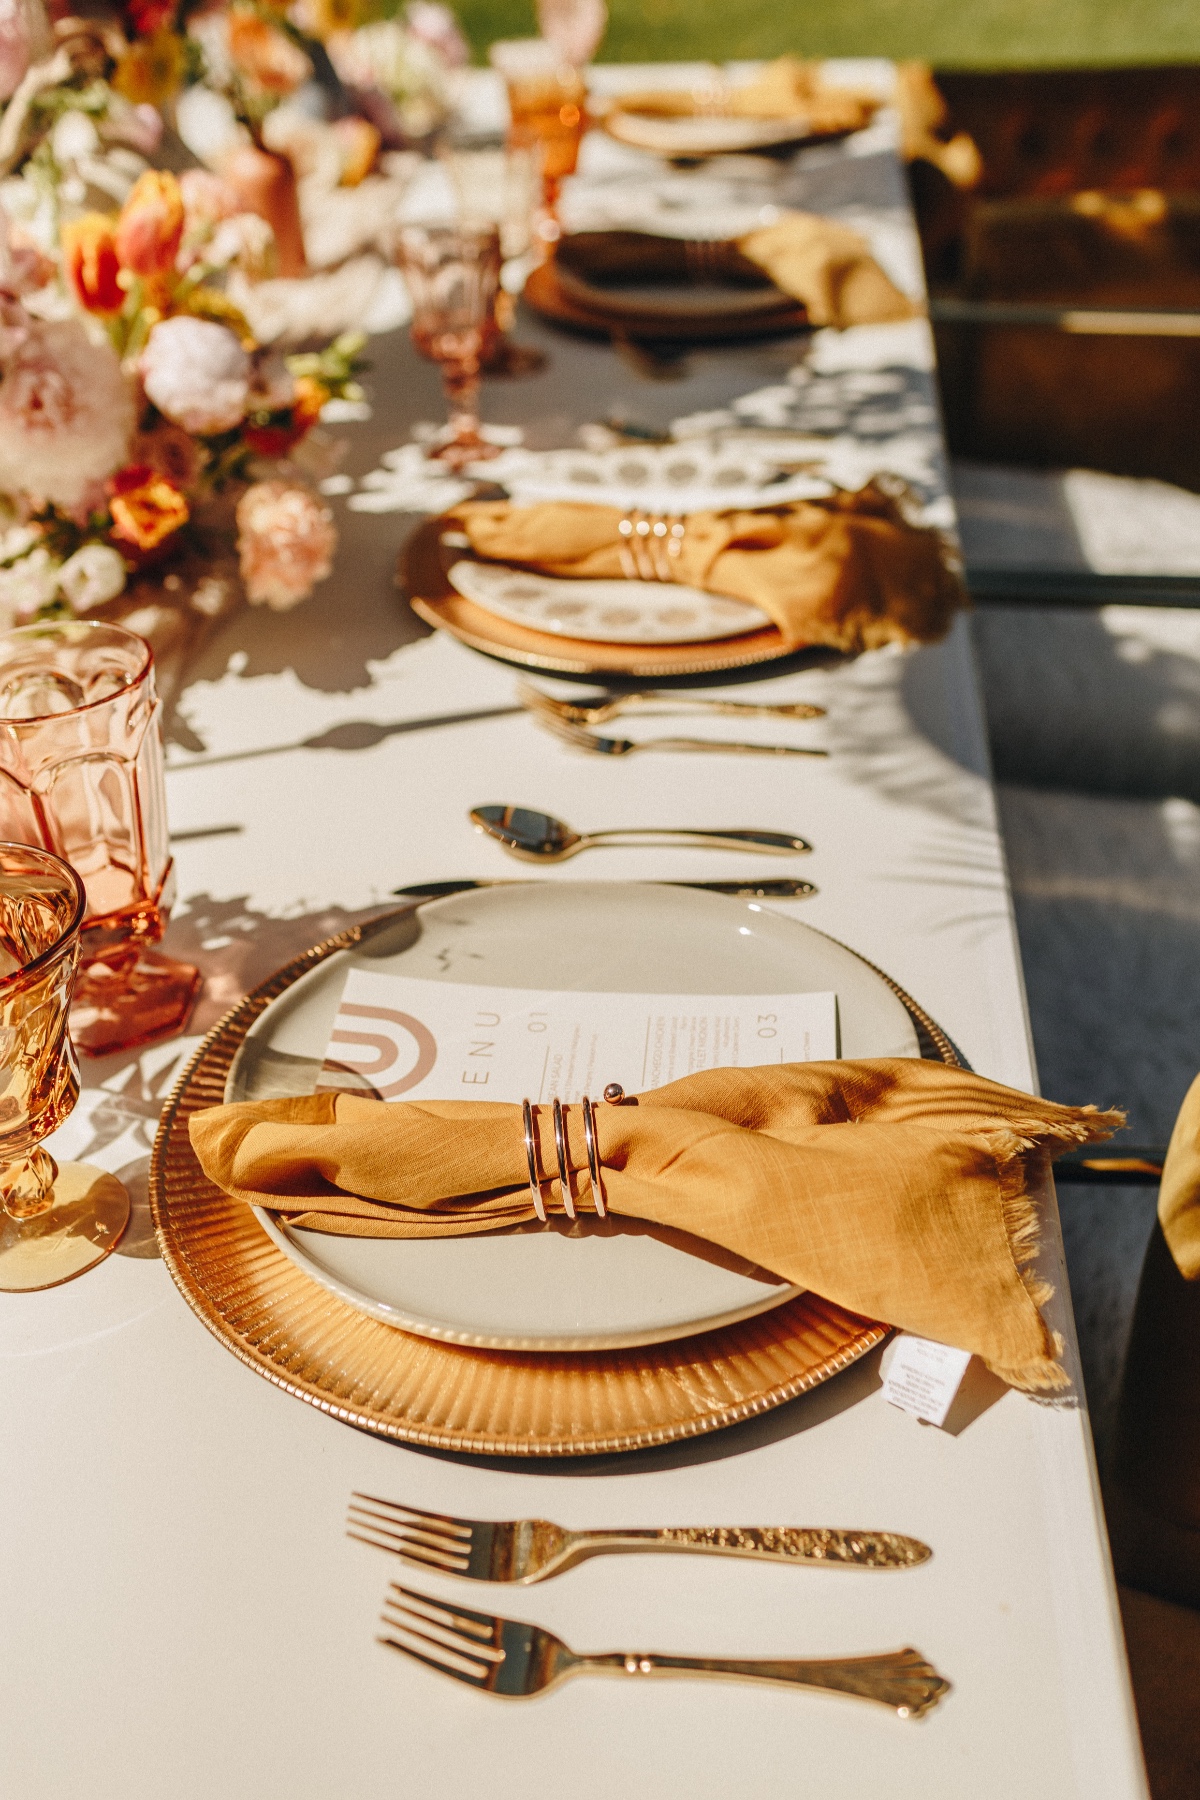 We Get Retro Vibes from this Palm Springs Wedding Inspiration